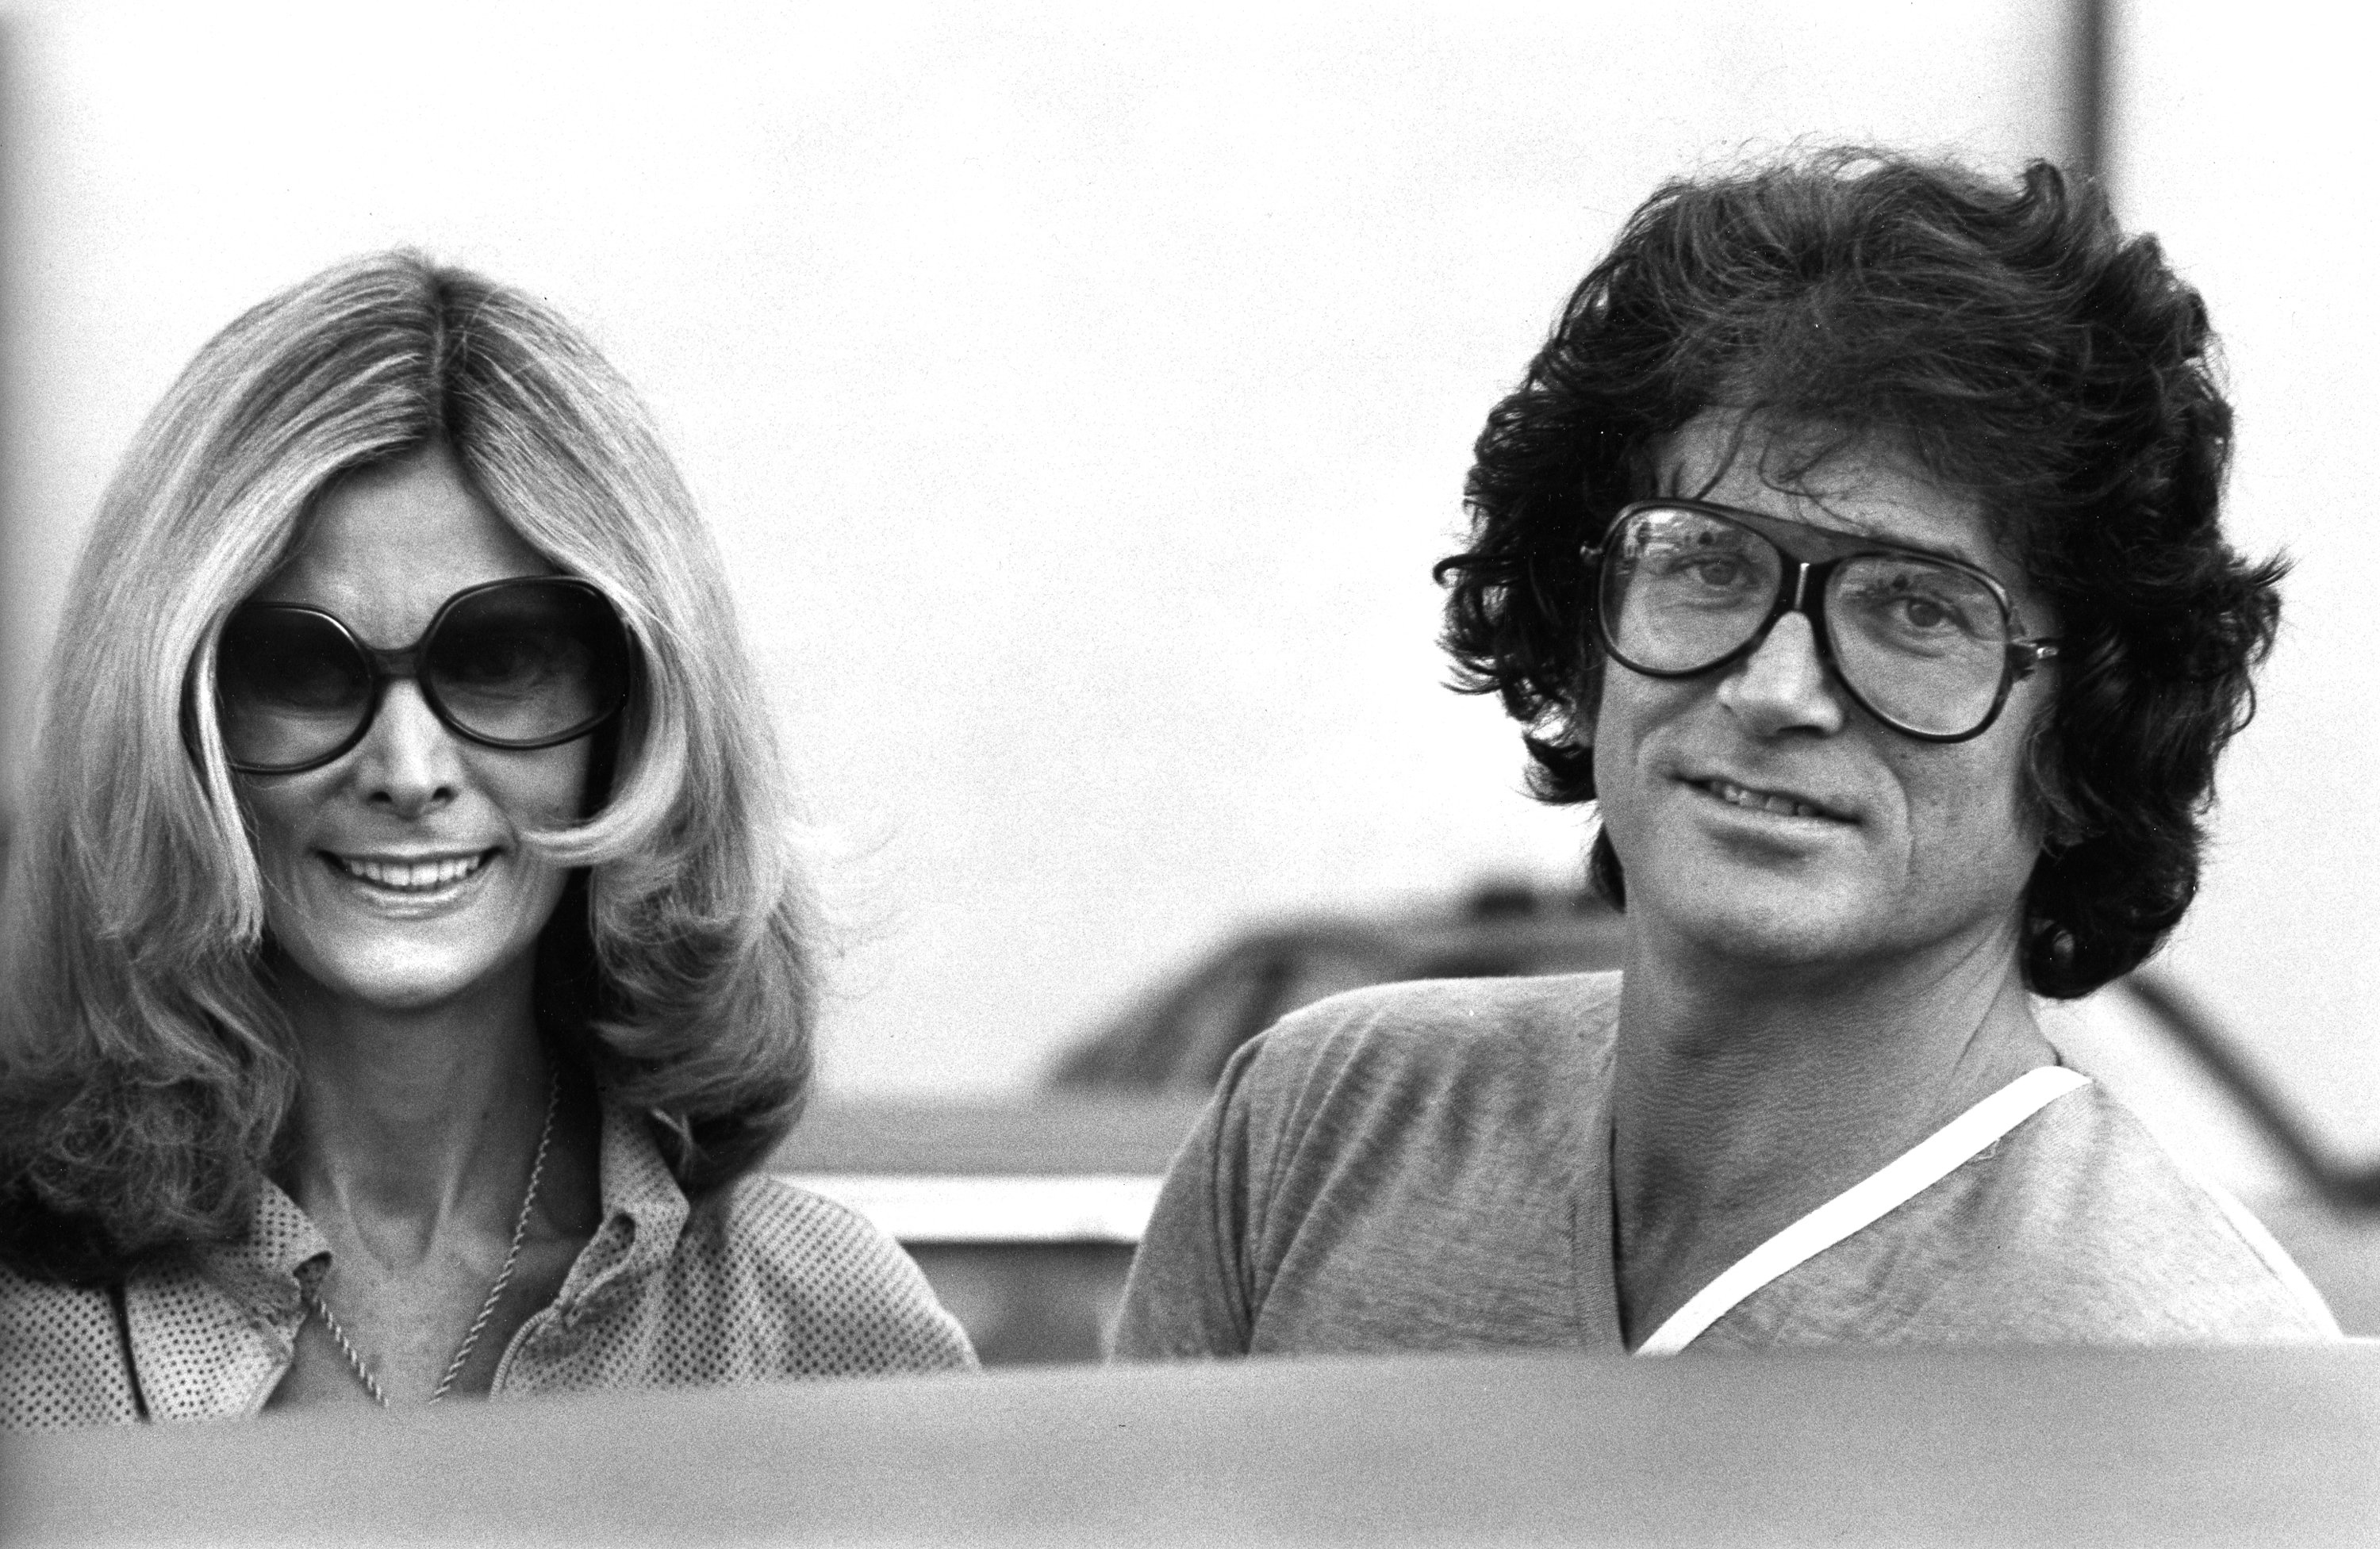 Michael Landon and wife Lynn Noe spotted on February 9, 1979 on Rodeo Drive in Beverly Hills, California. / Source: Getty Images